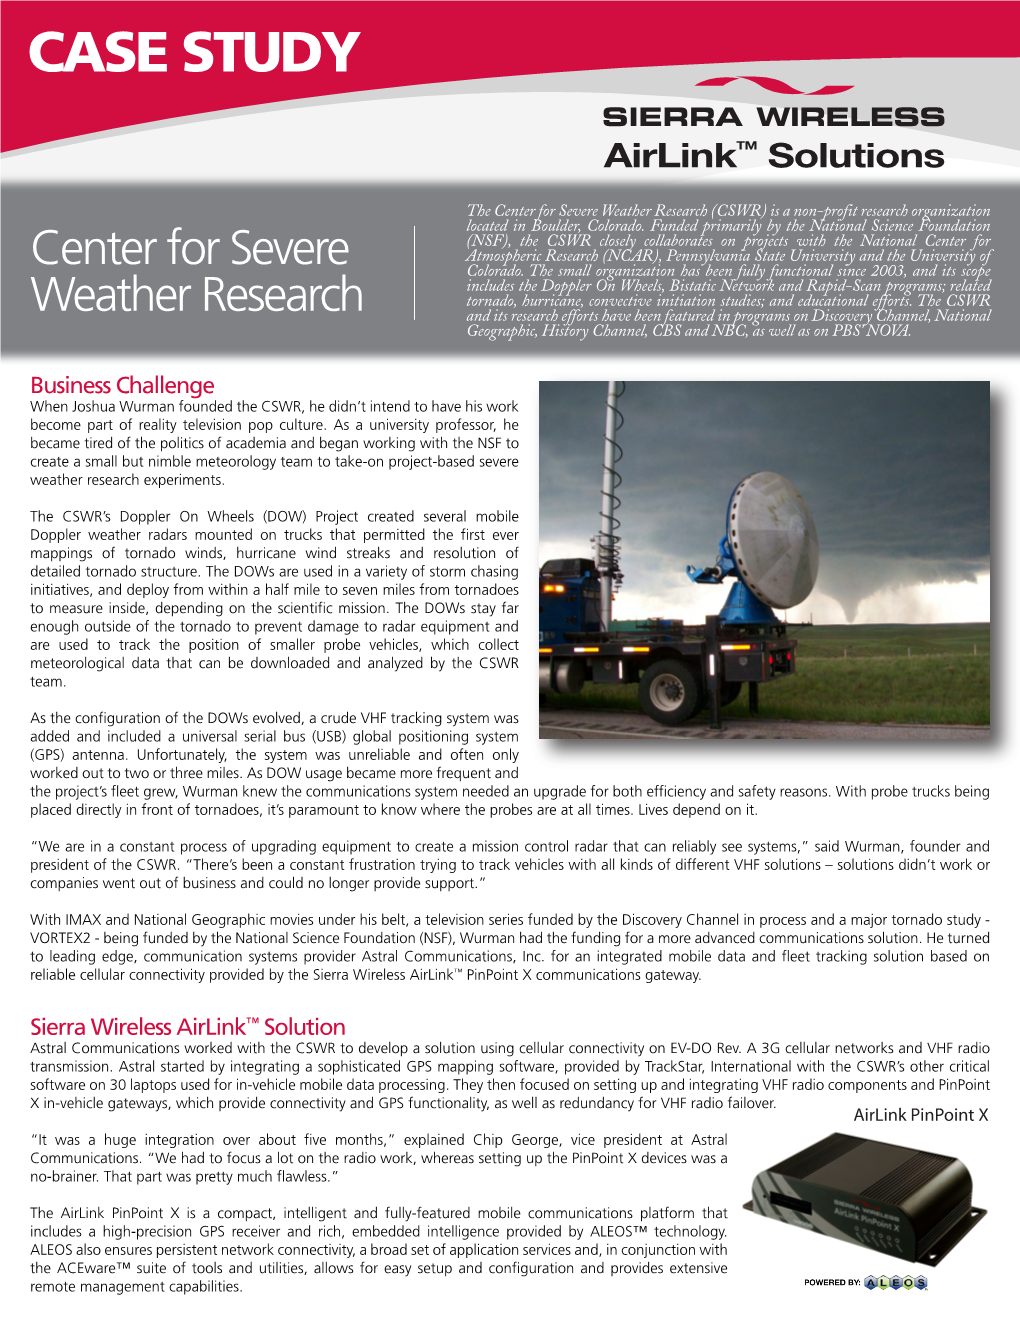 Center for Severe Weather Research (CSWR) Is a Non-Profit Research Organization Located in Boulder, Colorado